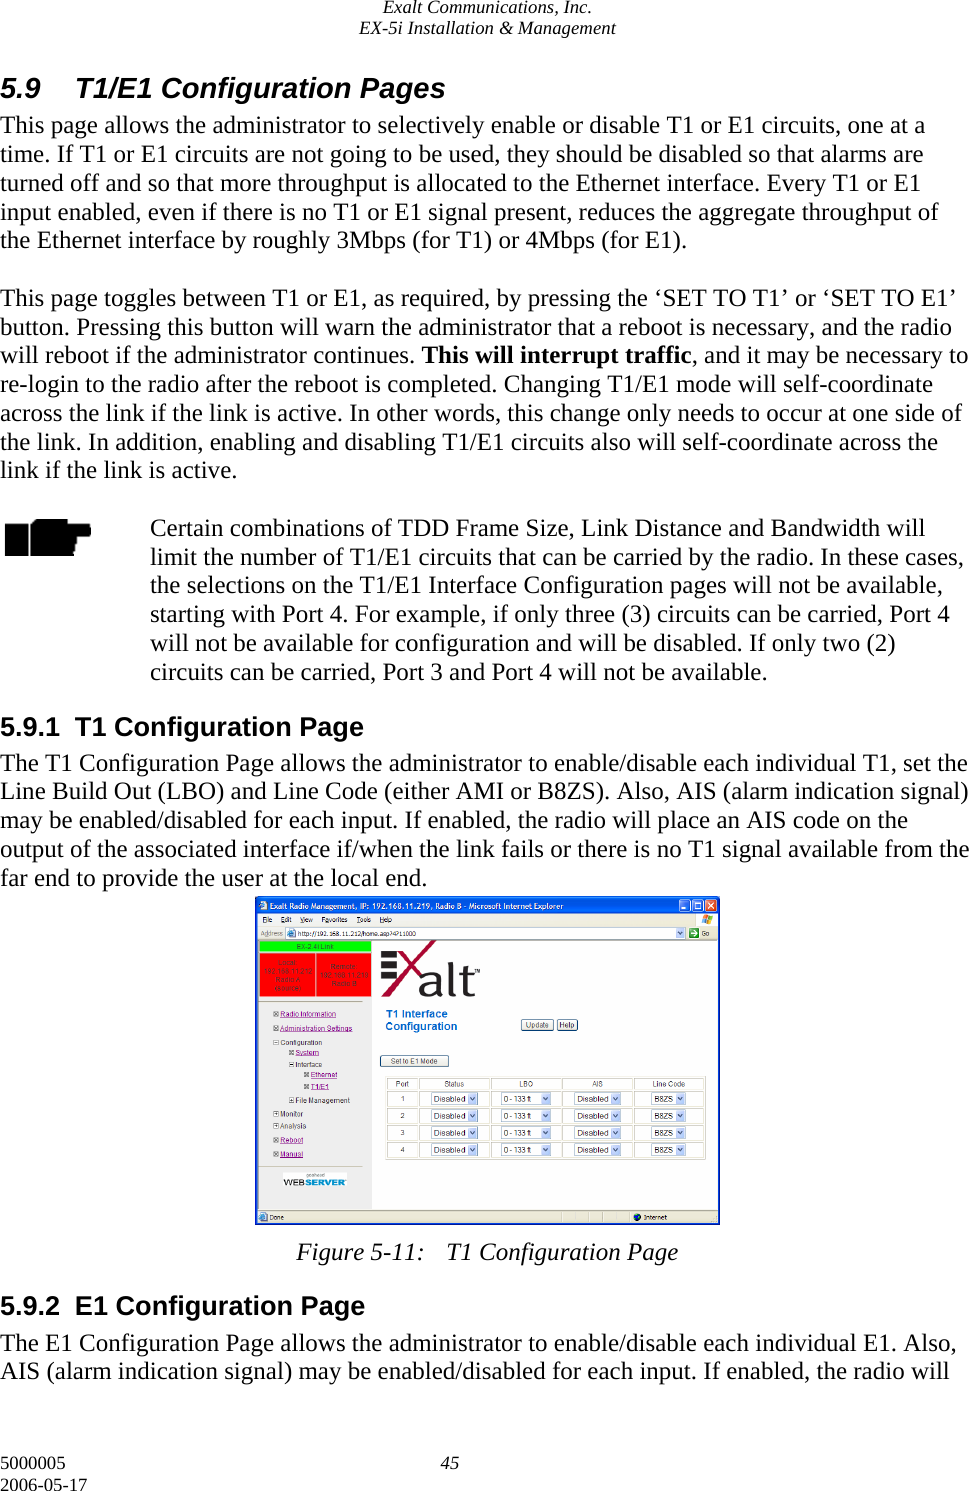 Exalt Communications, Inc. EX-5i Installation &amp; Management 5000005  45 2006-05-17 5.9  T1/E1 Configuration Pages This page allows the administrator to selectively enable or disable T1 or E1 circuits, one at a time. If T1 or E1 circuits are not going to be used, they should be disabled so that alarms are turned off and so that more throughput is allocated to the Ethernet interface. Every T1 or E1 input enabled, even if there is no T1 or E1 signal present, reduces the aggregate throughput of the Ethernet interface by roughly 3Mbps (for T1) or 4Mbps (for E1).  This page toggles between T1 or E1, as required, by pressing the ‘SET TO T1’ or ‘SET TO E1’ button. Pressing this button will warn the administrator that a reboot is necessary, and the radio will reboot if the administrator continues. This will interrupt traffic, and it may be necessary to re-login to the radio after the reboot is completed. Changing T1/E1 mode will self-coordinate across the link if the link is active. In other words, this change only needs to occur at one side of the link. In addition, enabling and disabling T1/E1 circuits also will self-coordinate across the link if the link is active.  Certain combinations of TDD Frame Size, Link Distance and Bandwidth will limit the number of T1/E1 circuits that can be carried by the radio. In these cases, the selections on the T1/E1 Interface Configuration pages will not be available, starting with Port 4. For example, if only three (3) circuits can be carried, Port 4 will not be available for configuration and will be disabled. If only two (2) circuits can be carried, Port 3 and Port 4 will not be available. 5.9.1 T1 Configuration Page The T1 Configuration Page allows the administrator to enable/disable each individual T1, set the Line Build Out (LBO) and Line Code (either AMI or B8ZS). Also, AIS (alarm indication signal) may be enabled/disabled for each input. If enabled, the radio will place an AIS code on the output of the associated interface if/when the link fails or there is no T1 signal available from the far end to provide the user at the local end.             Figure 5-11:  T1 Configuration Page 5.9.2  E1 Configuration Page The E1 Configuration Page allows the administrator to enable/disable each individual E1. Also, AIS (alarm indication signal) may be enabled/disabled for each input. If enabled, the radio will 